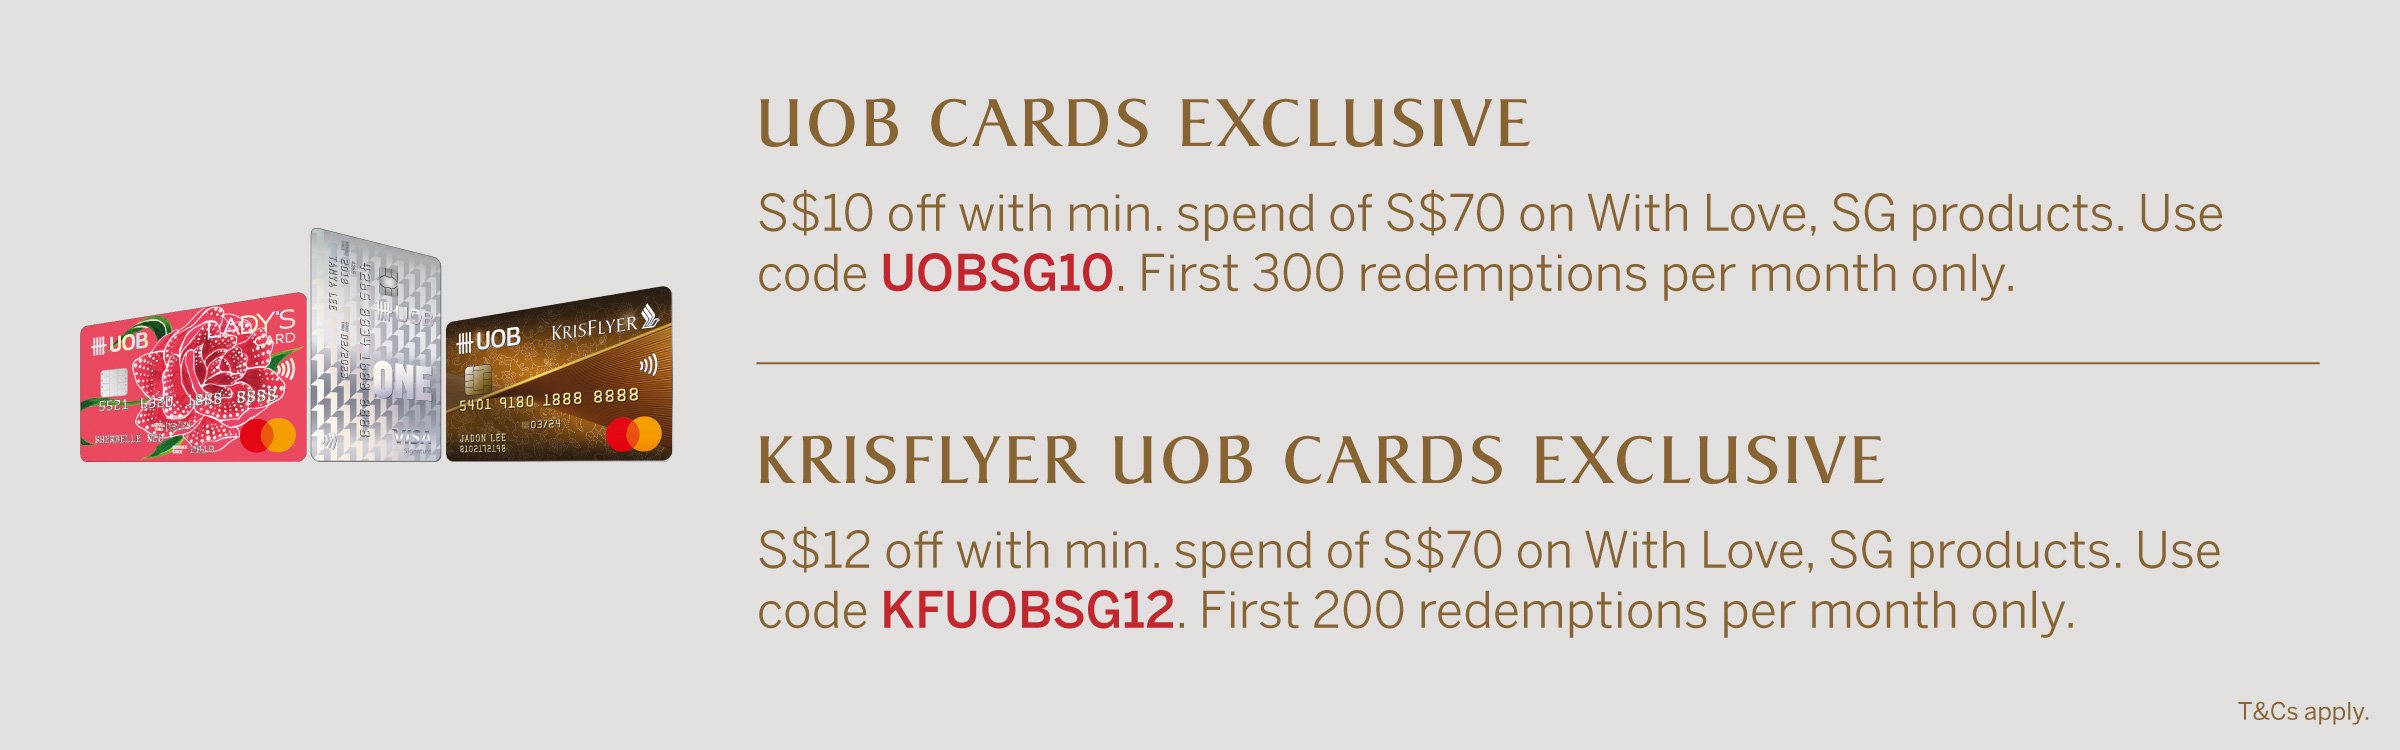 With Love, SG - UOB Cards Promotions